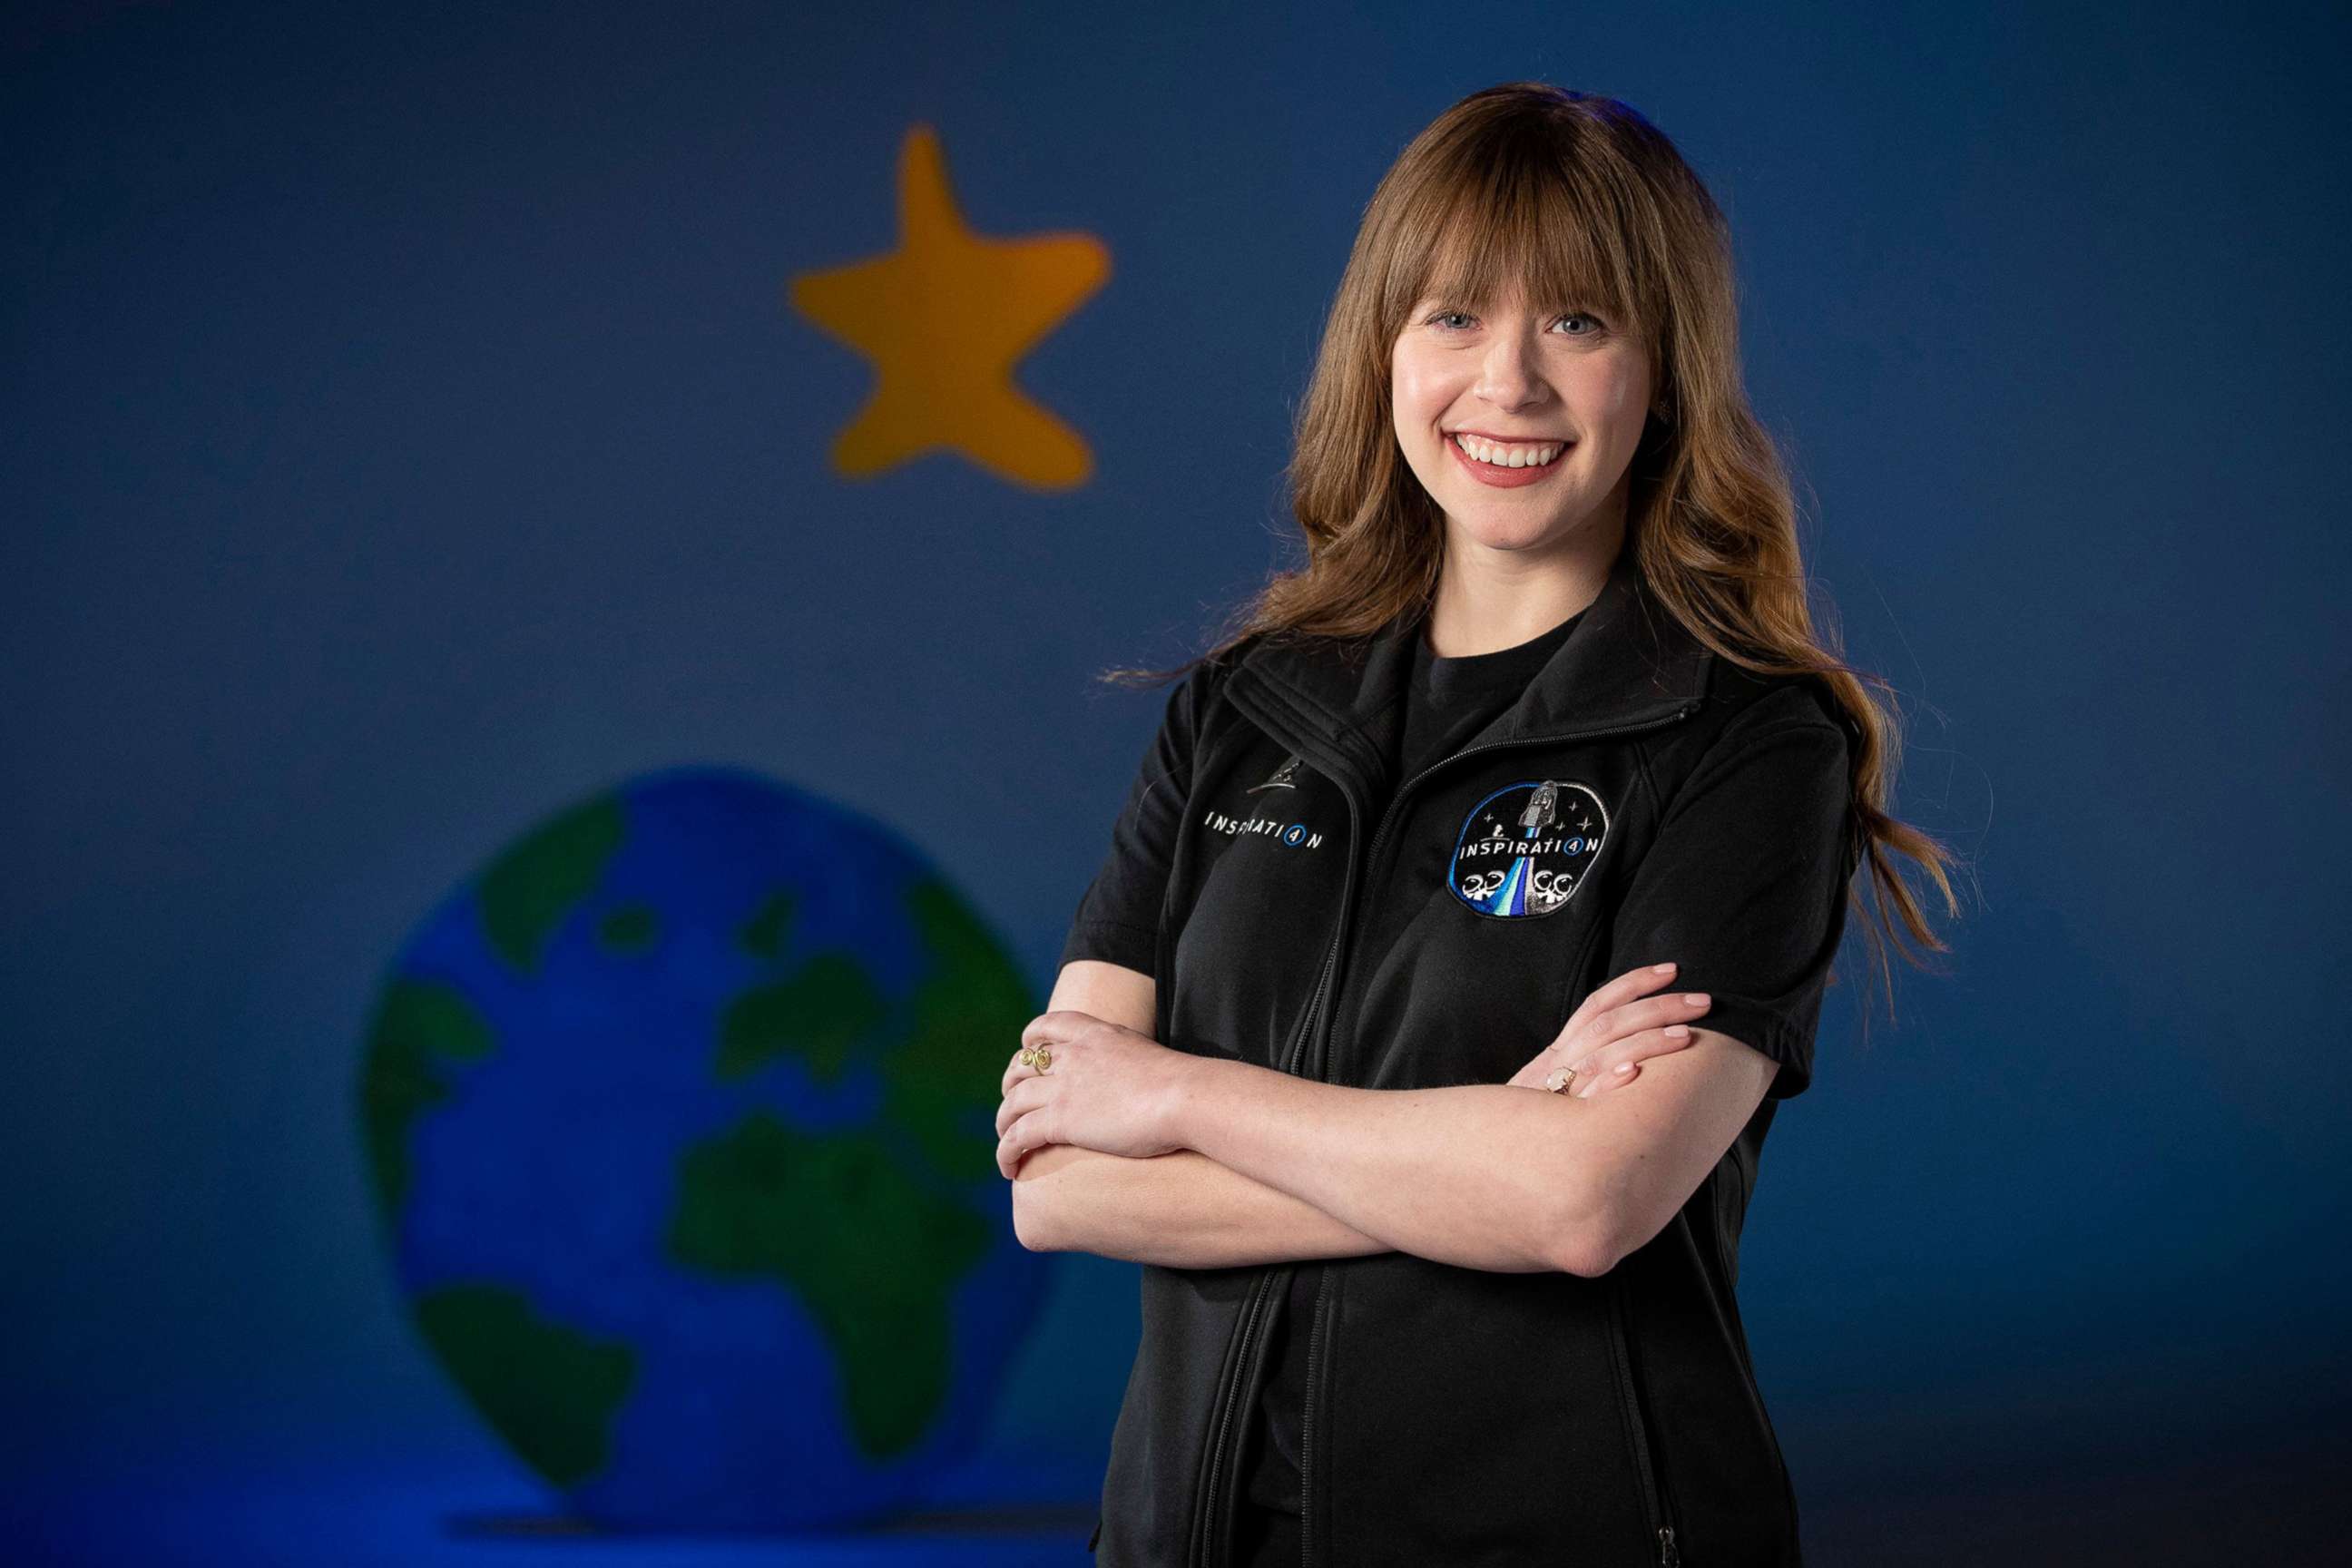 PHOTO: St. Jude Children's Research Hospital's physician assistant and cancer survivor Hayley Arceneaux, poses for a photo while visiting a SpaceX facility in Hawthorne, Calif.